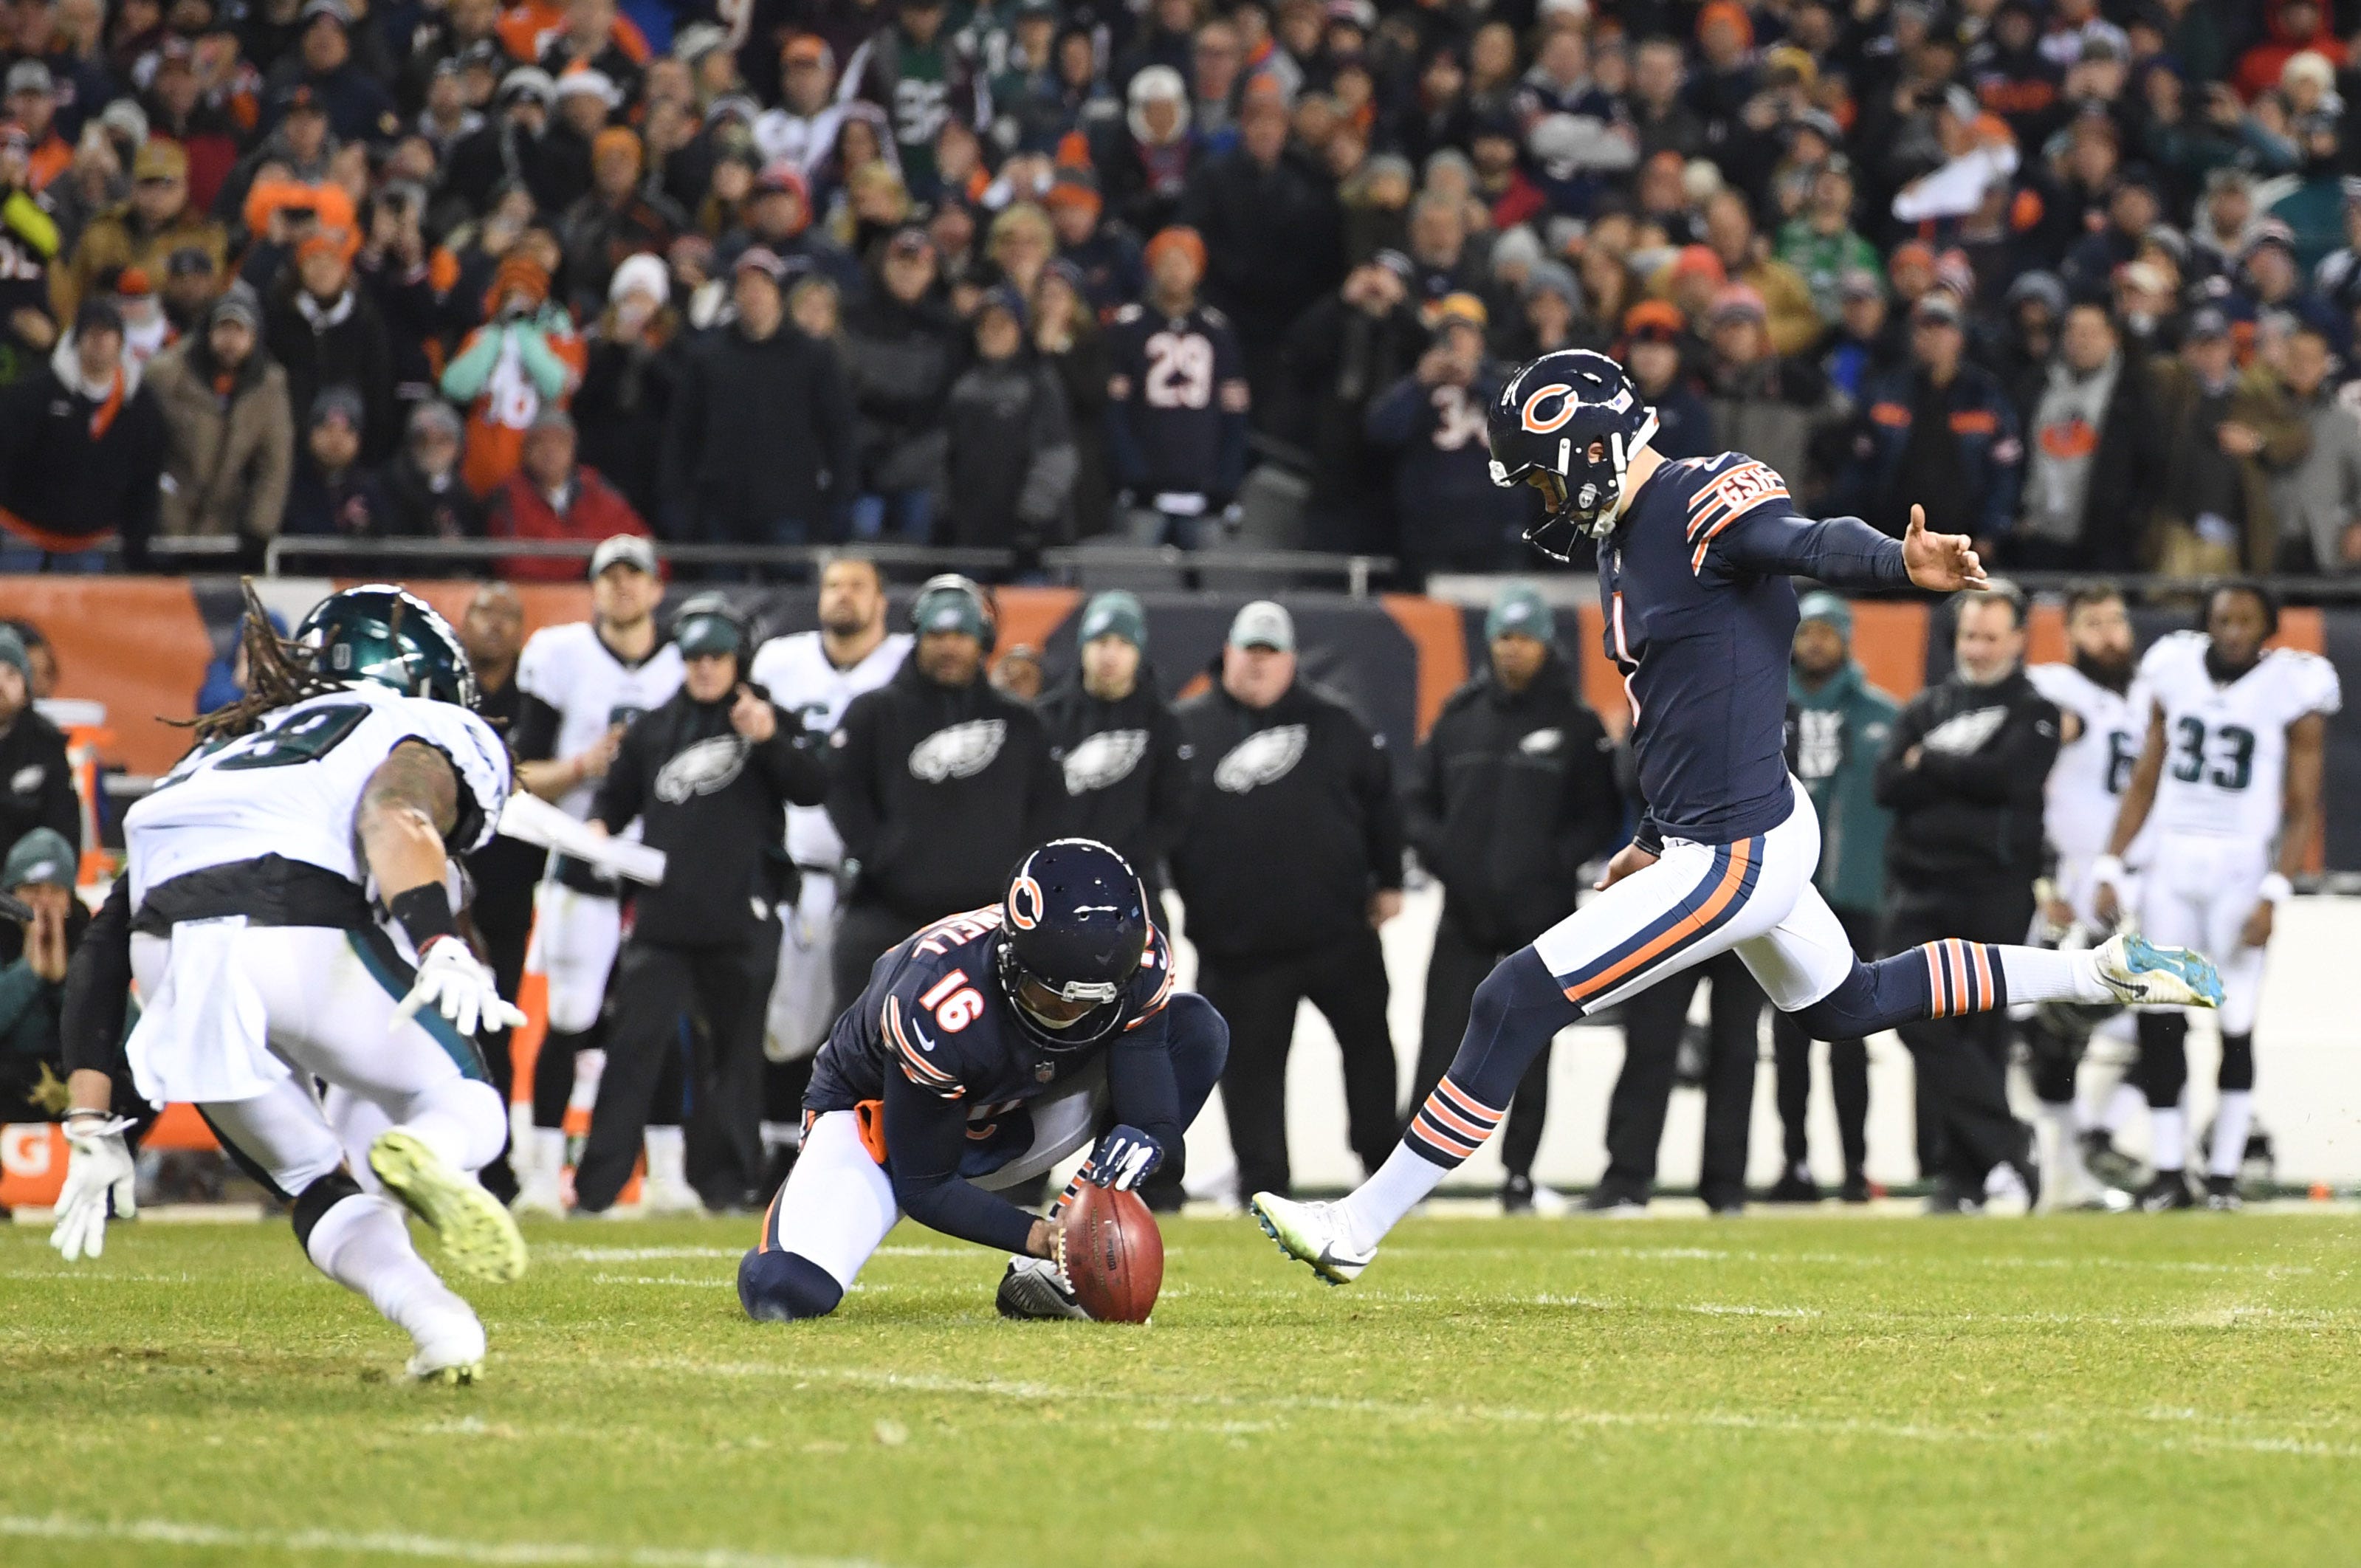 Chicago brewery offers free beer if customers can make kick Bears' Cody Parkey missed